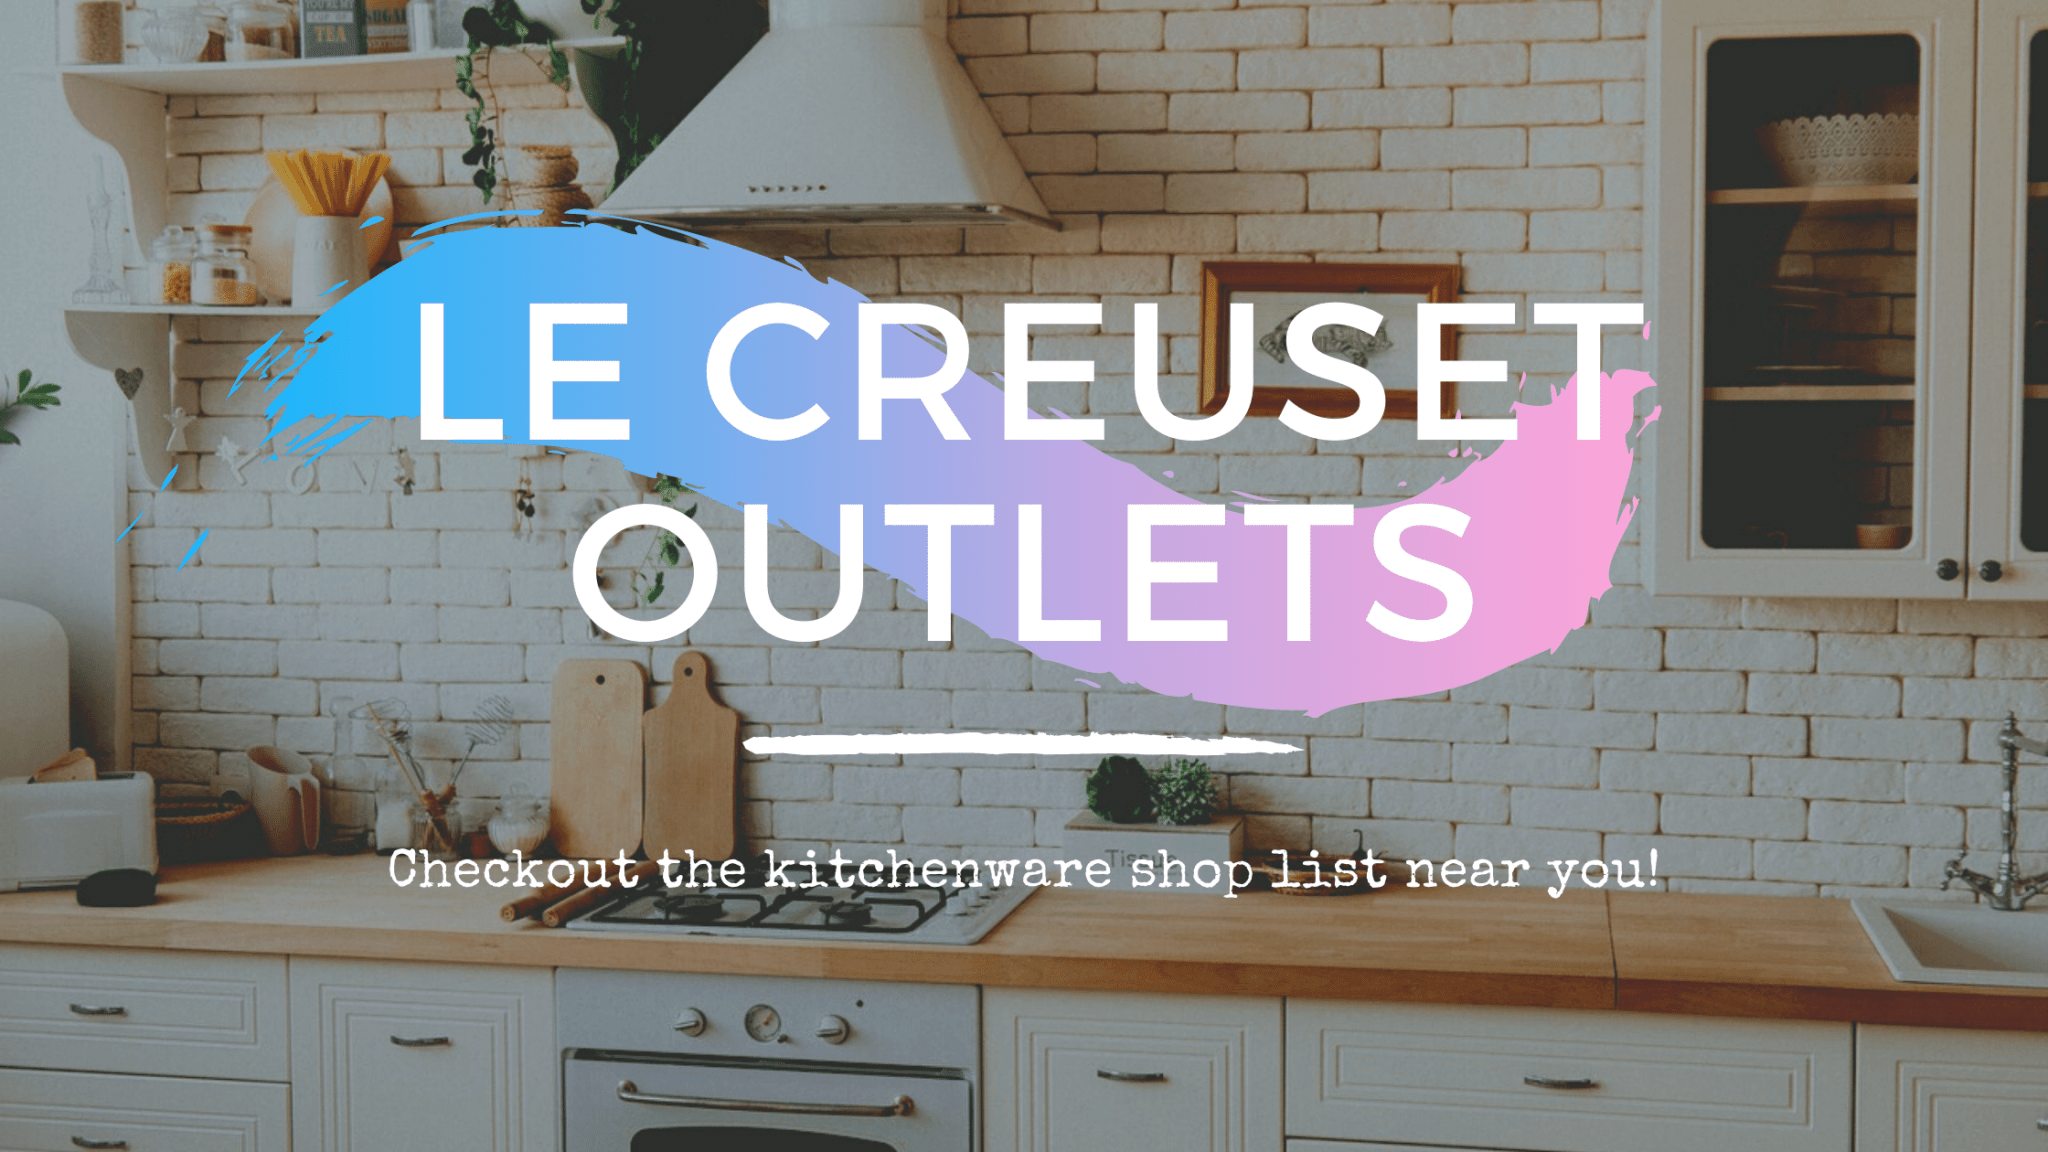 Le Creuset Outlet Shops Your go to shop for all kinds of Kitchenwares